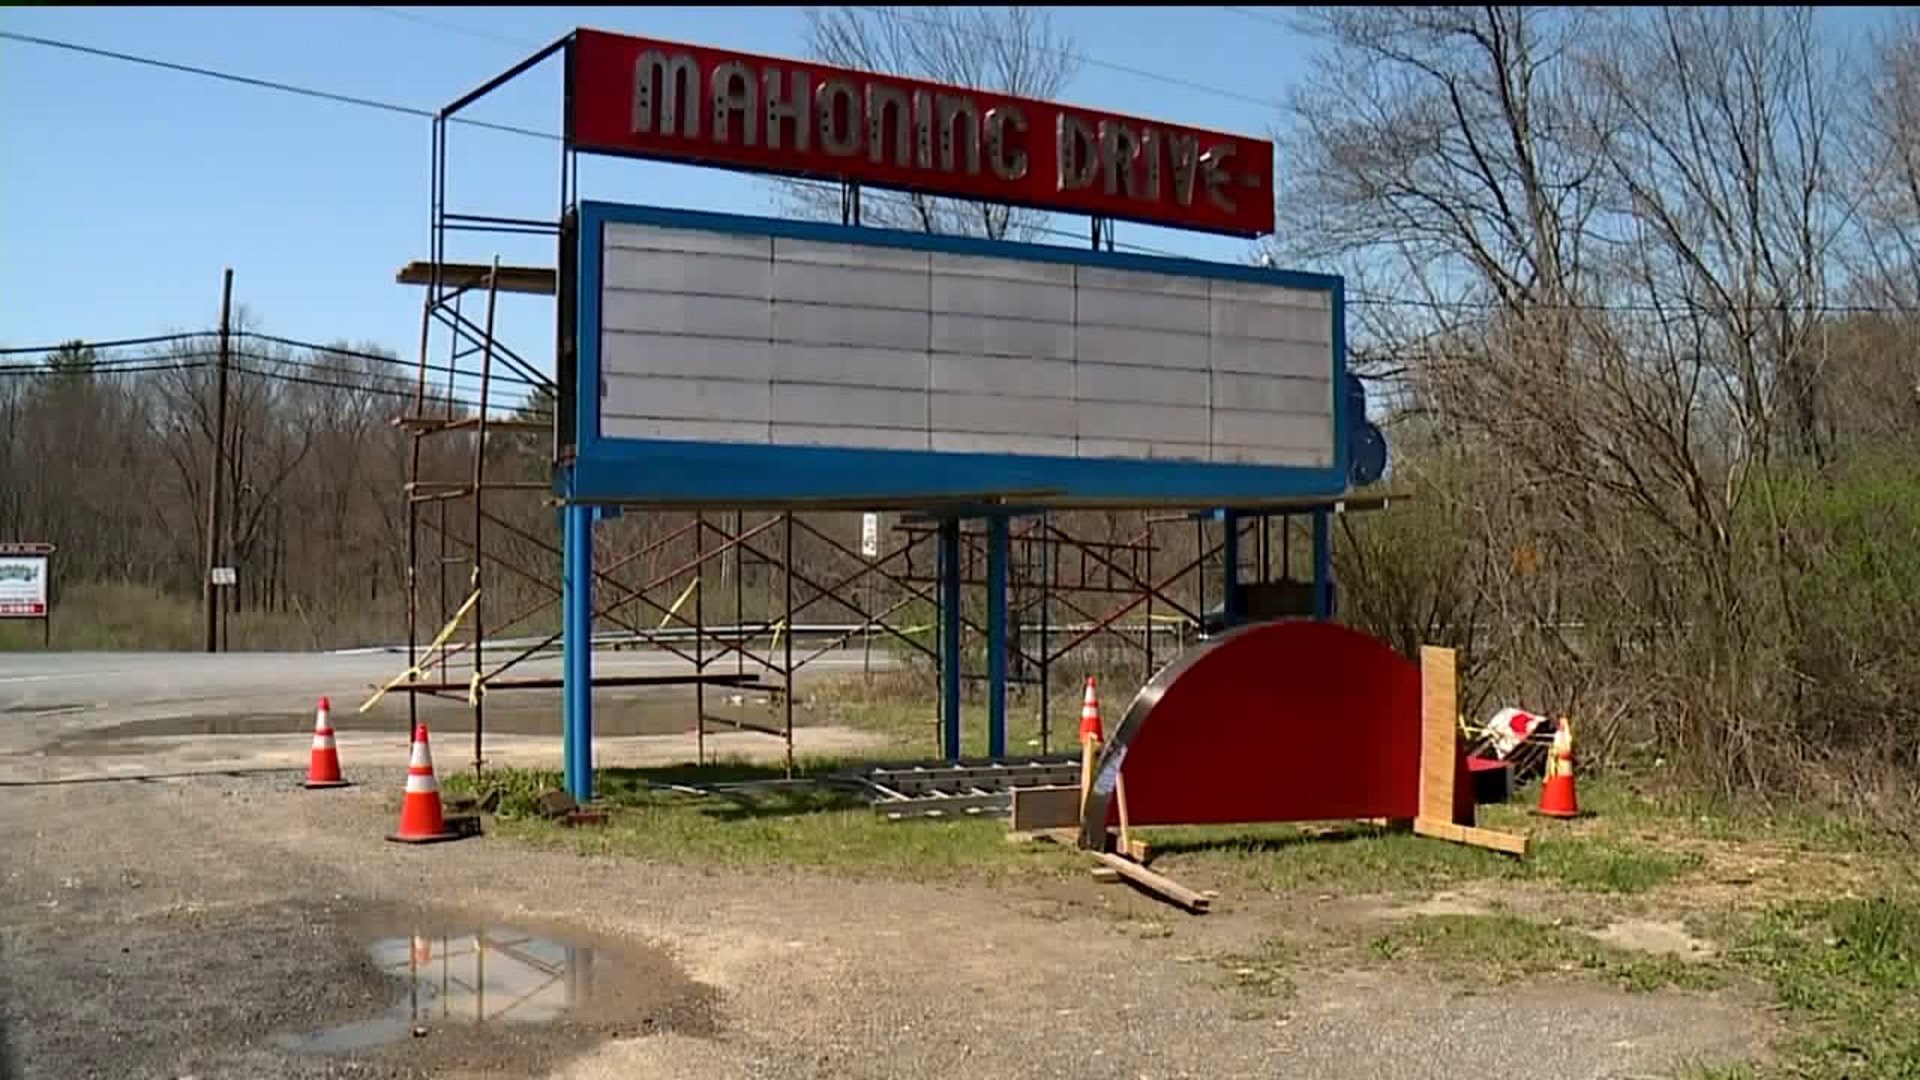 Repairing Iconic Marquee at Carbon County Drive-In